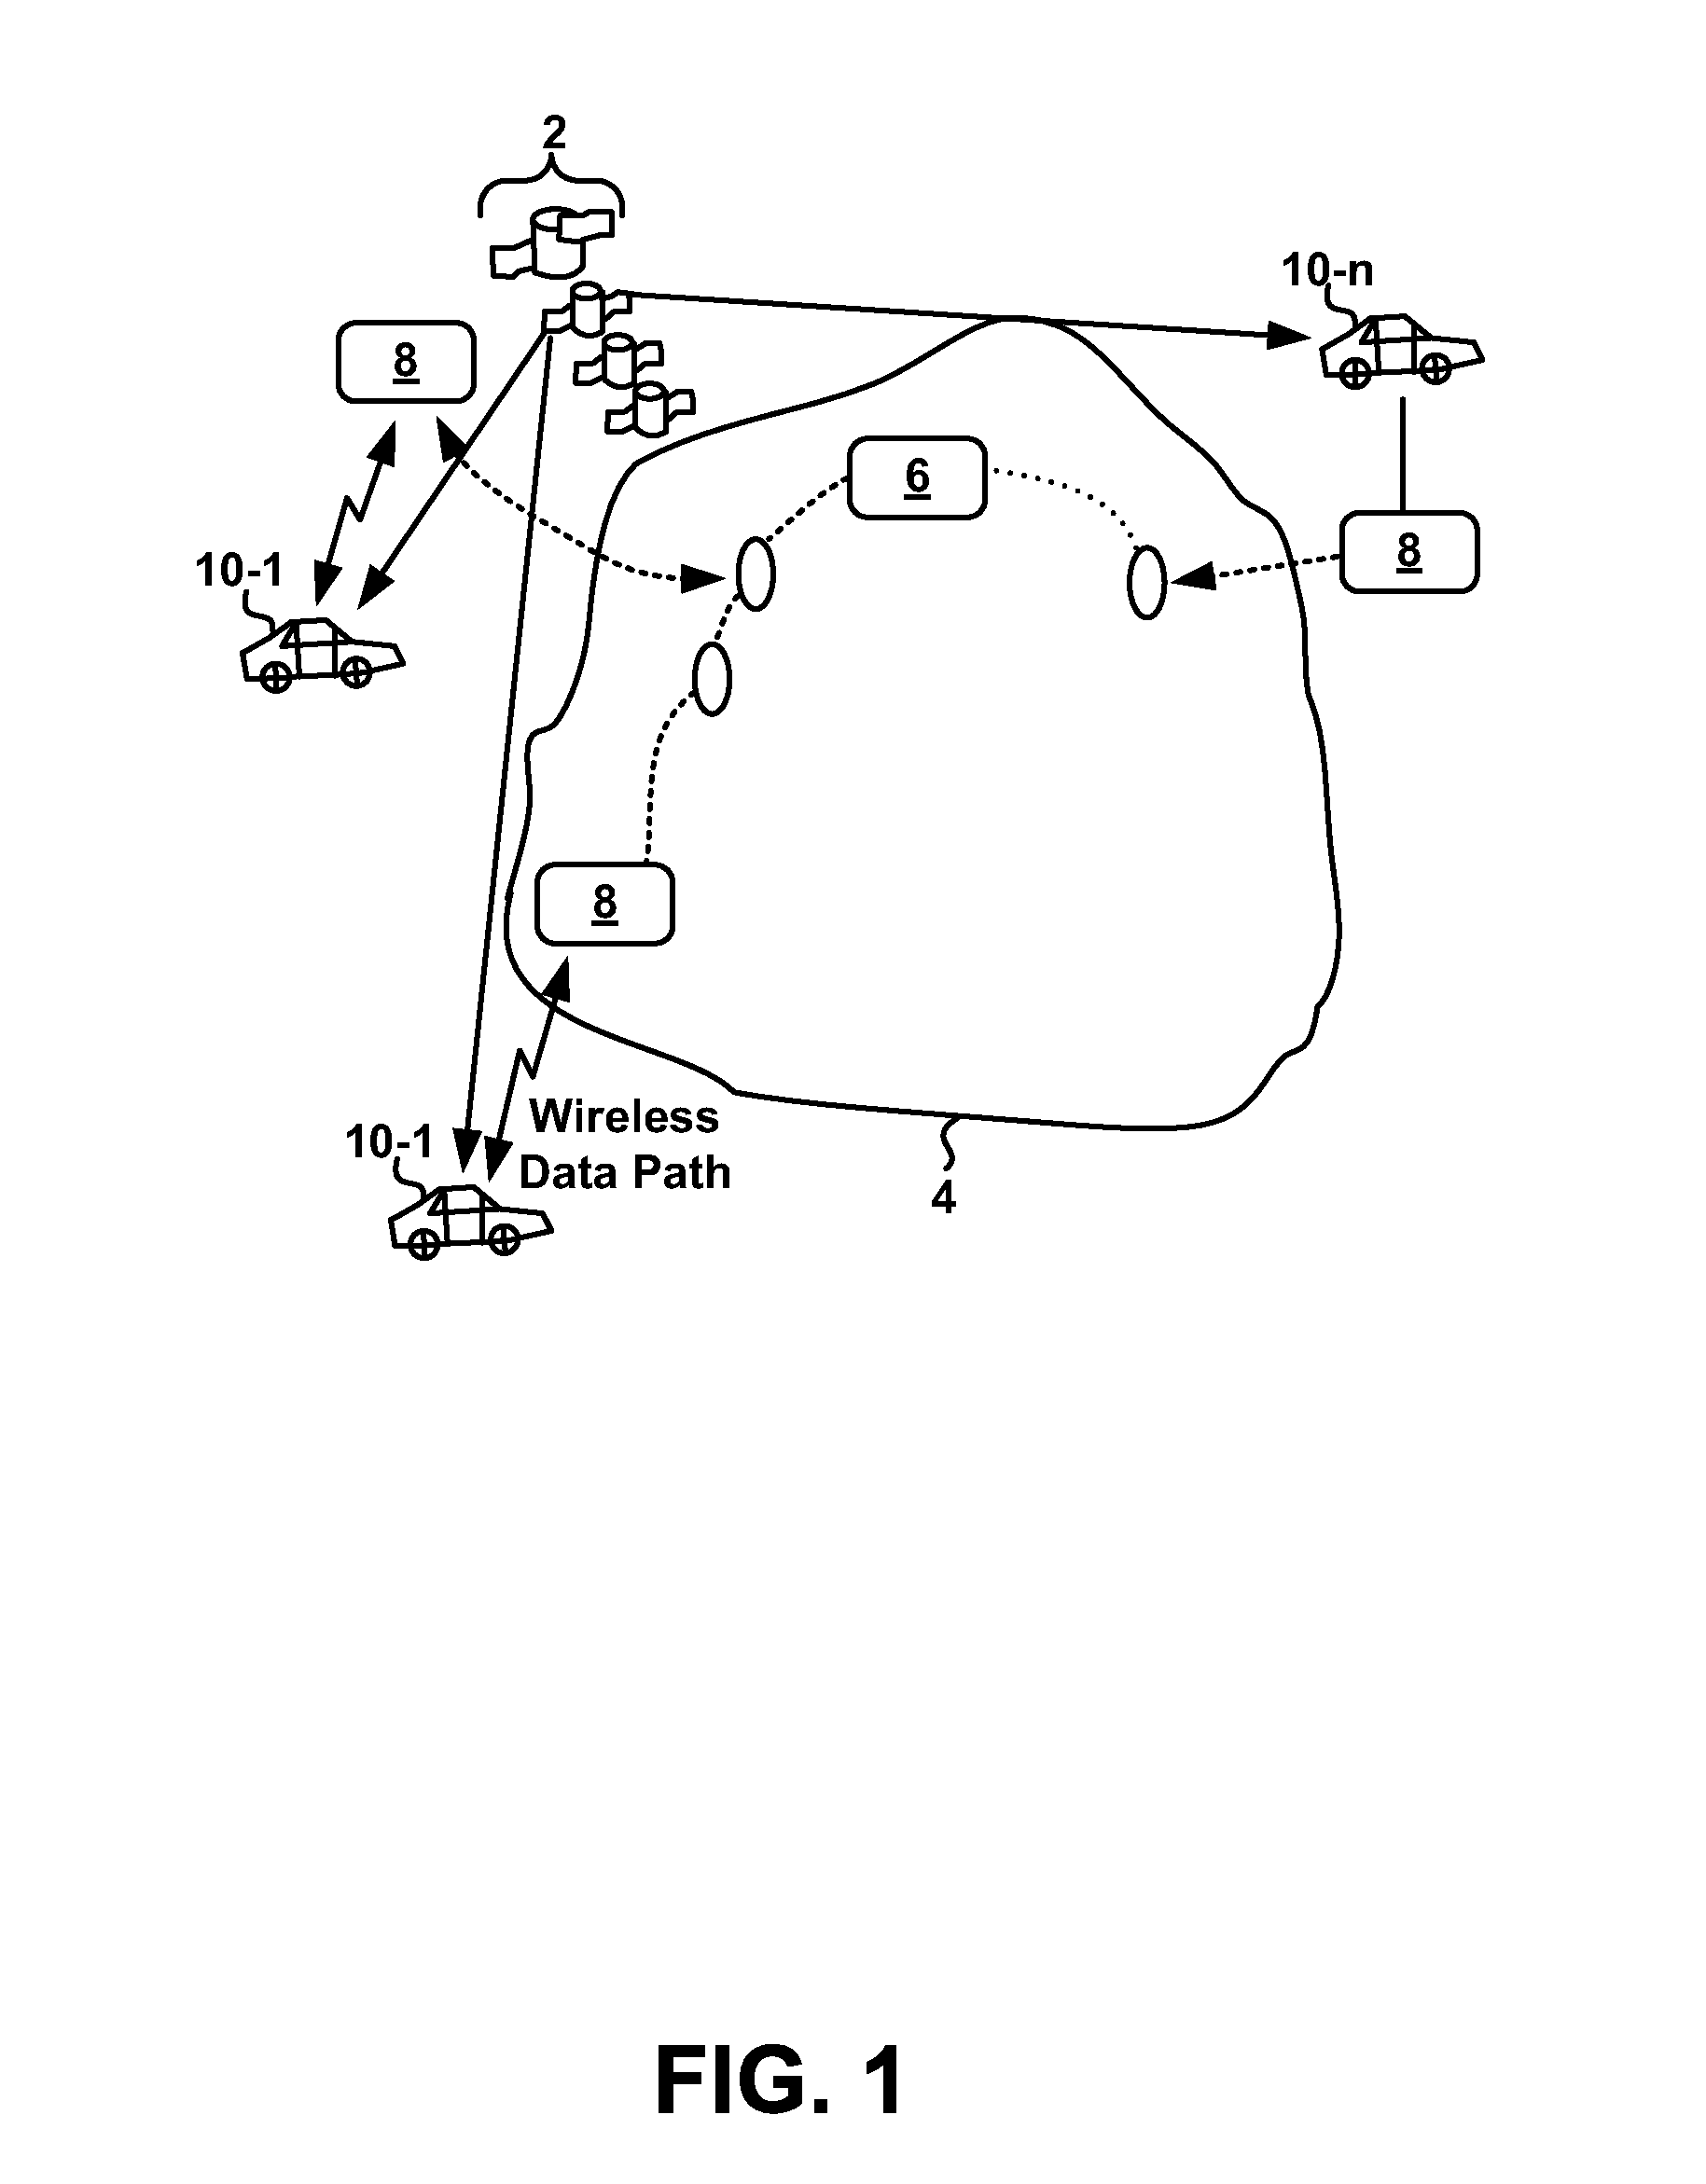 Method for locating coverage gaps in wireless communication services